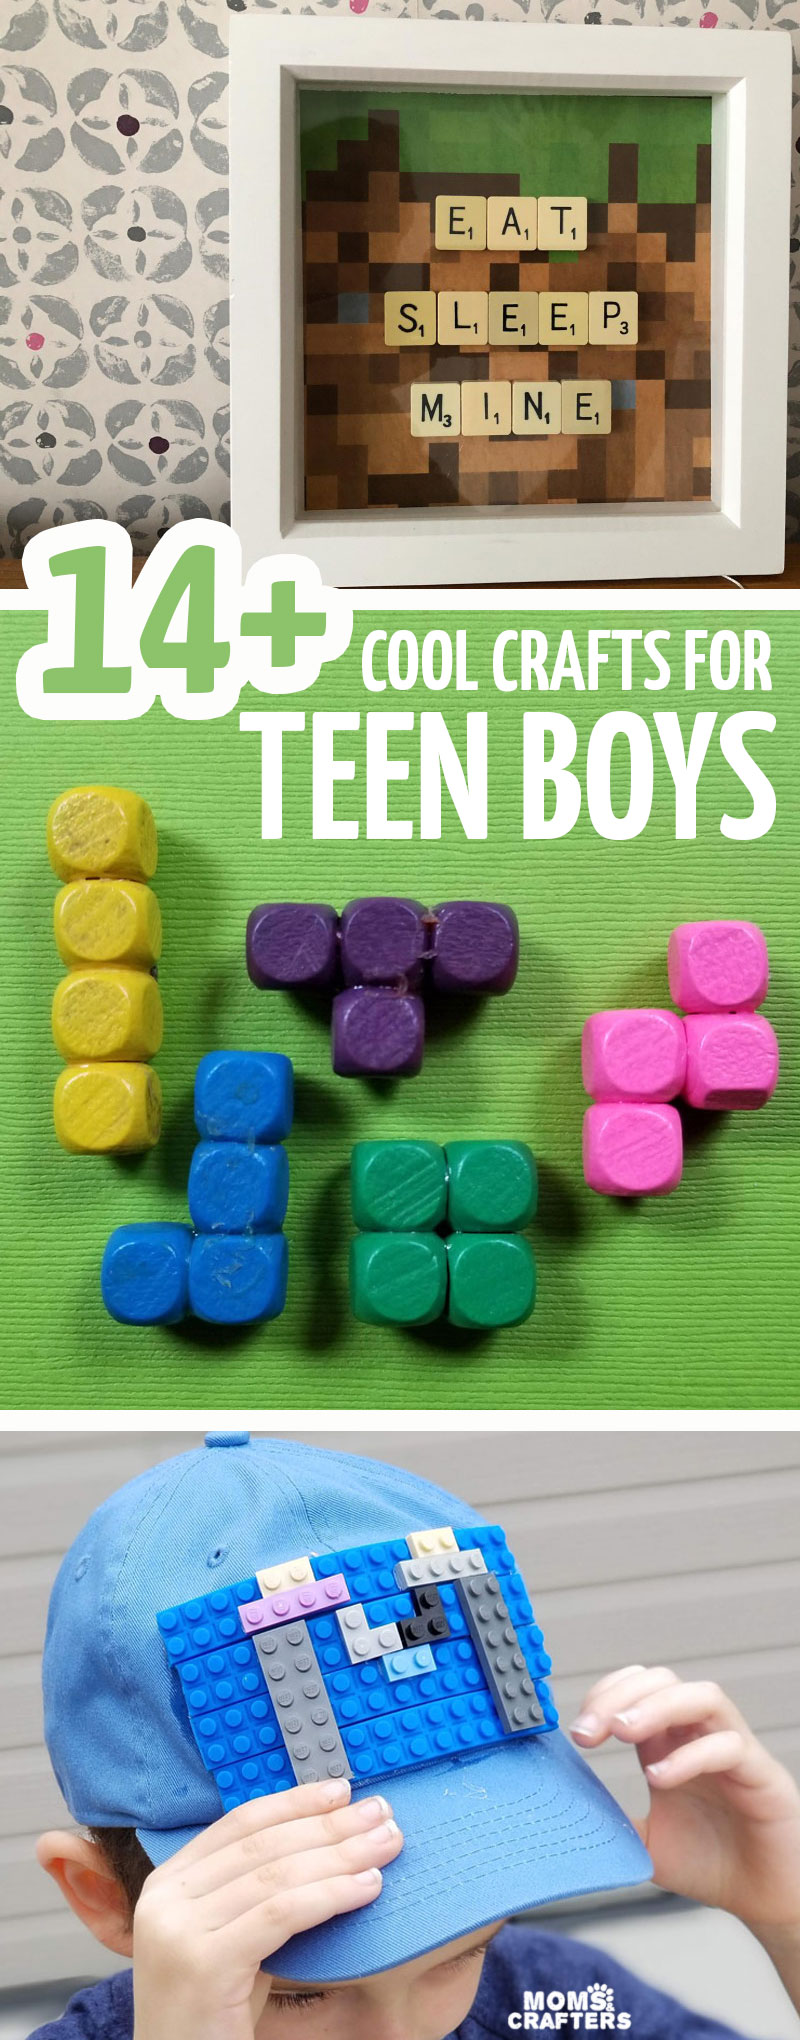 Crafts for teen boys - 14+ Creative Ideas for Teenagers